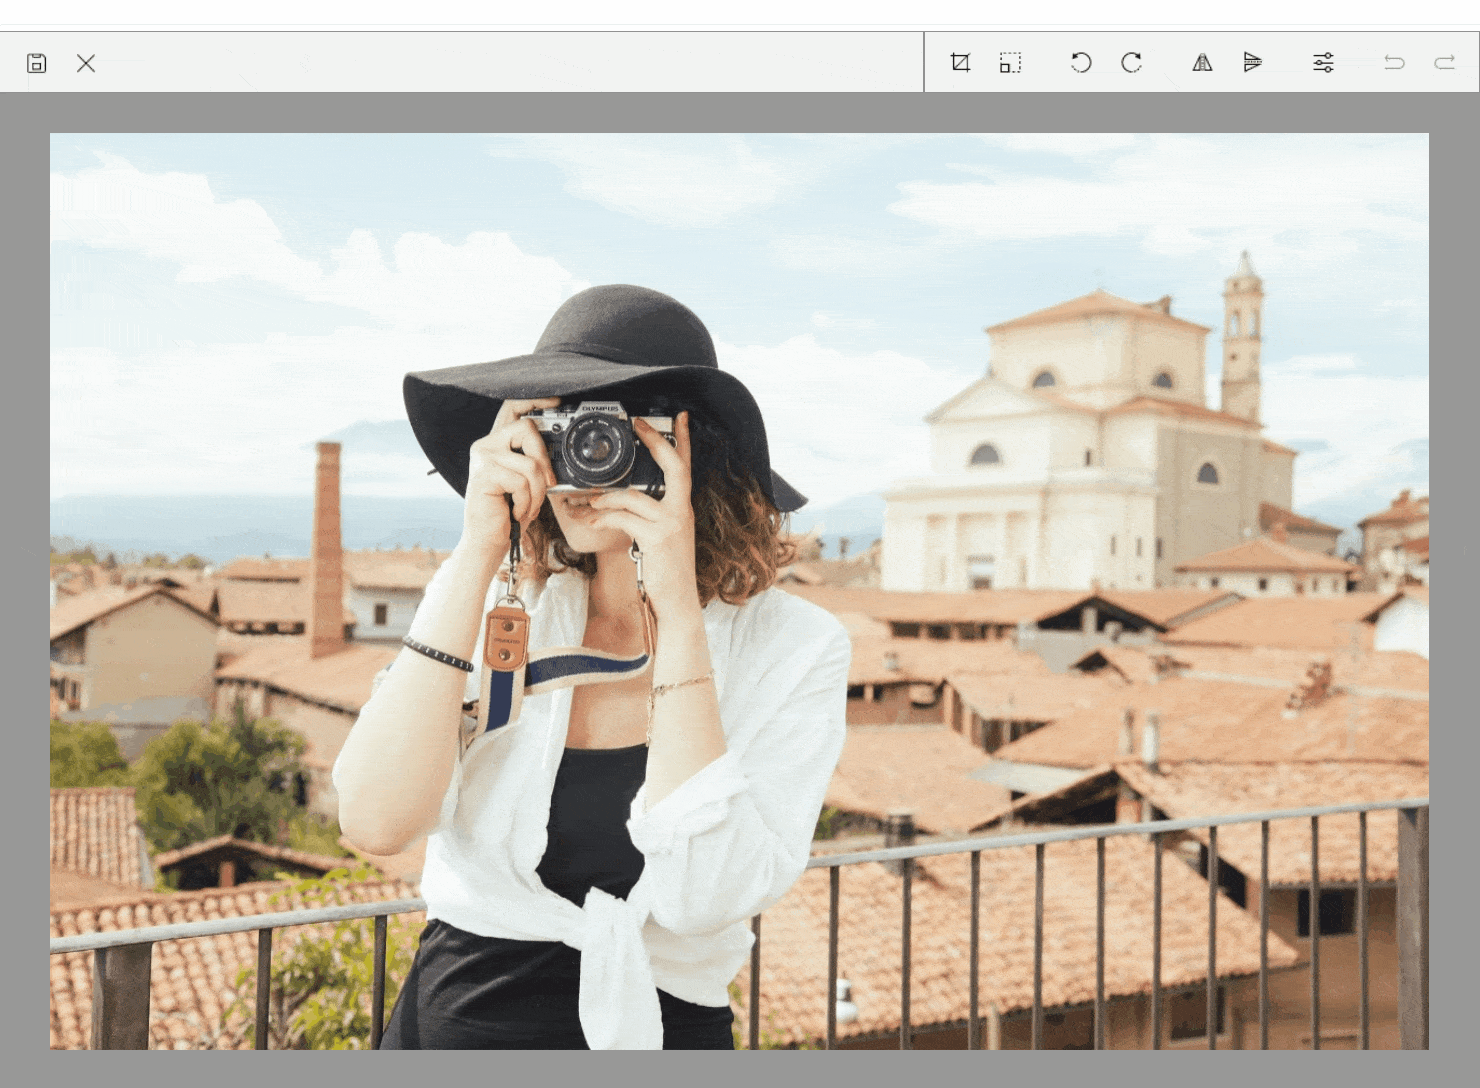 ImageEditor shows image of a person taking a picture with a camera